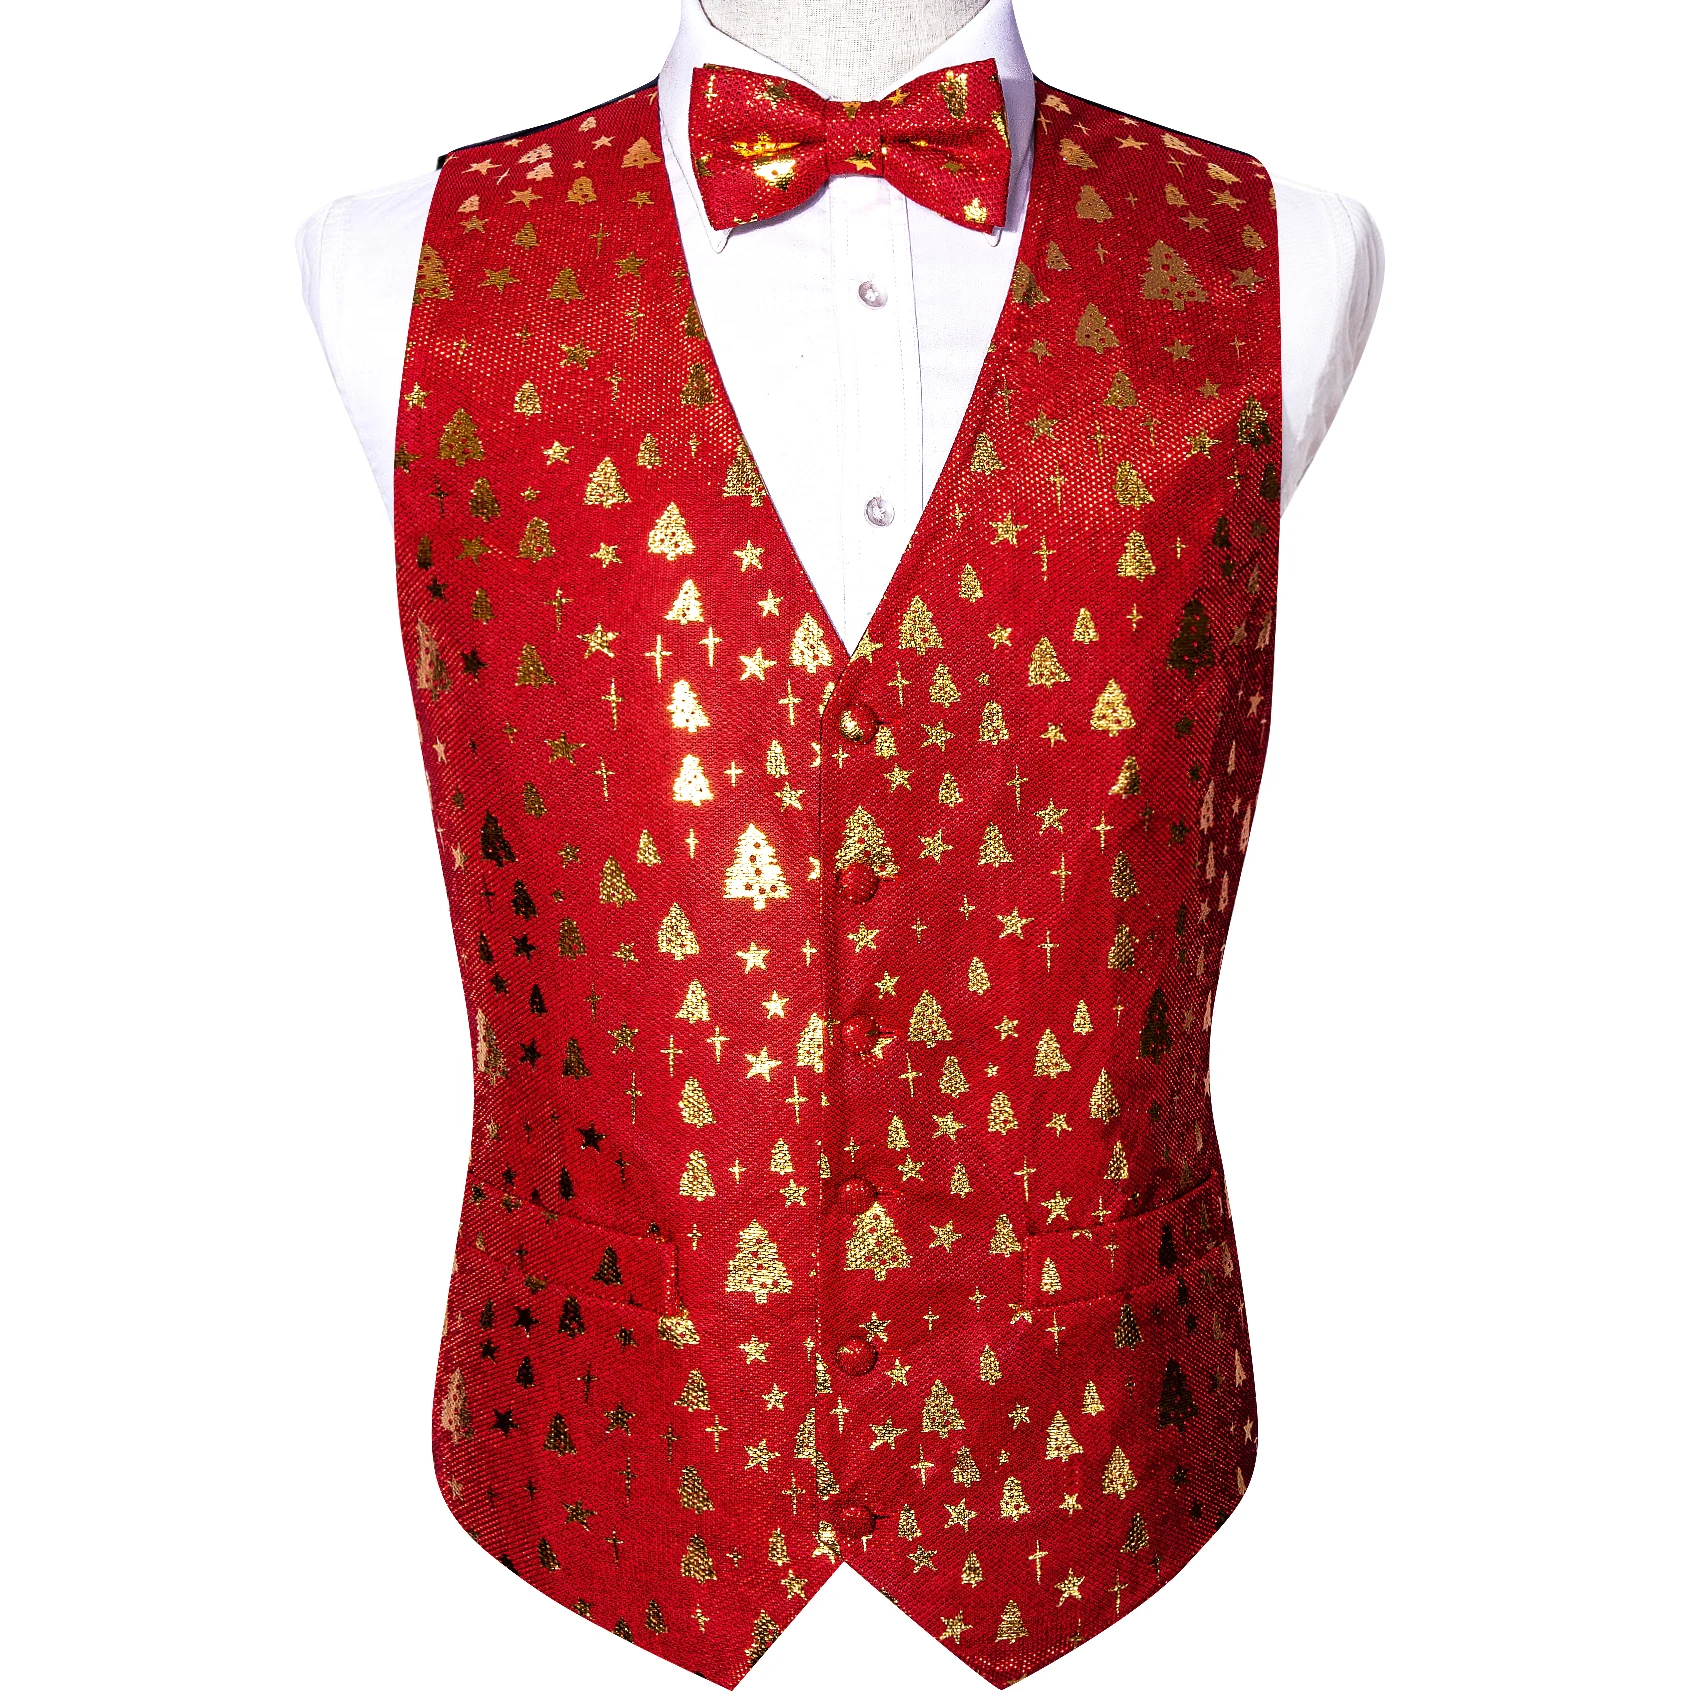 

Luxury Festival Vest for Men Silk Red Gold Stars Xmas Christmas Trees Waistcoat Grow Ornament Tie Bowtie Set Party Barry Wang